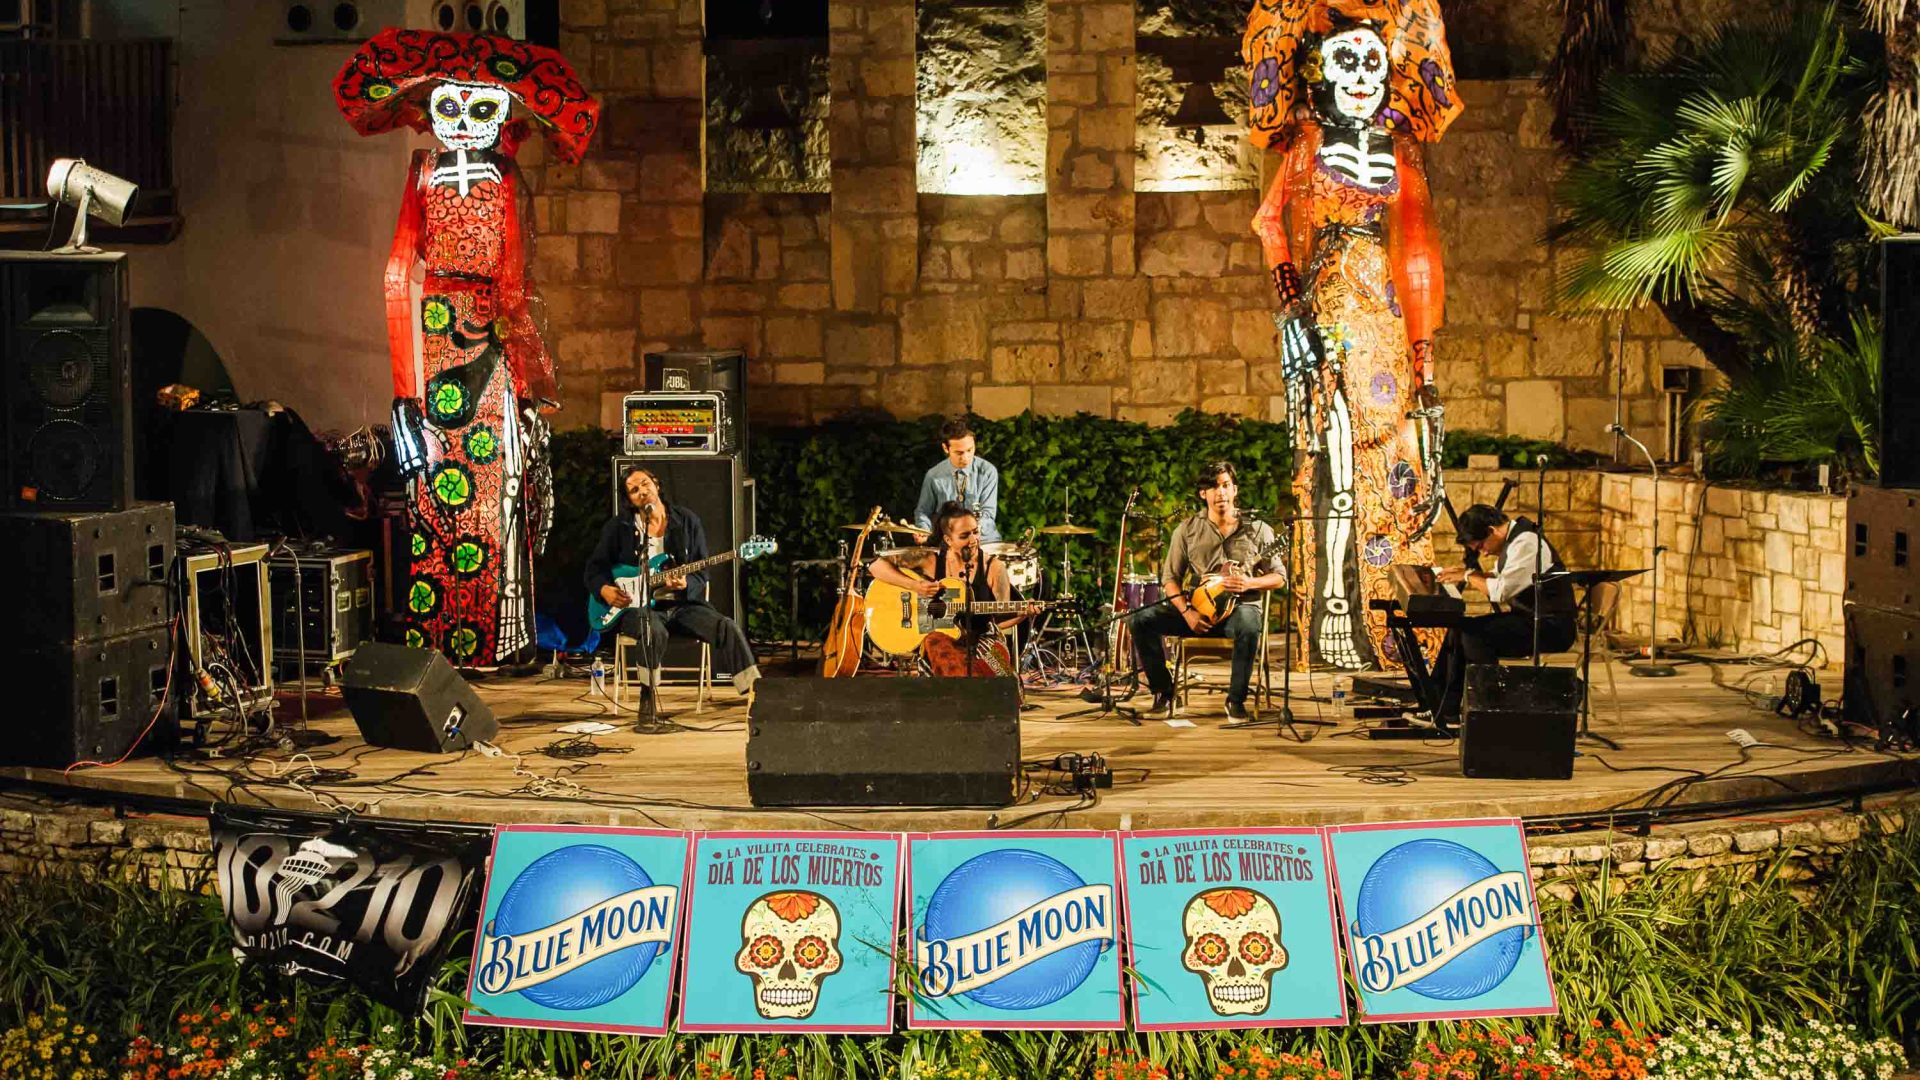 A band plays on a stage at Dia de los muertos celebrations.